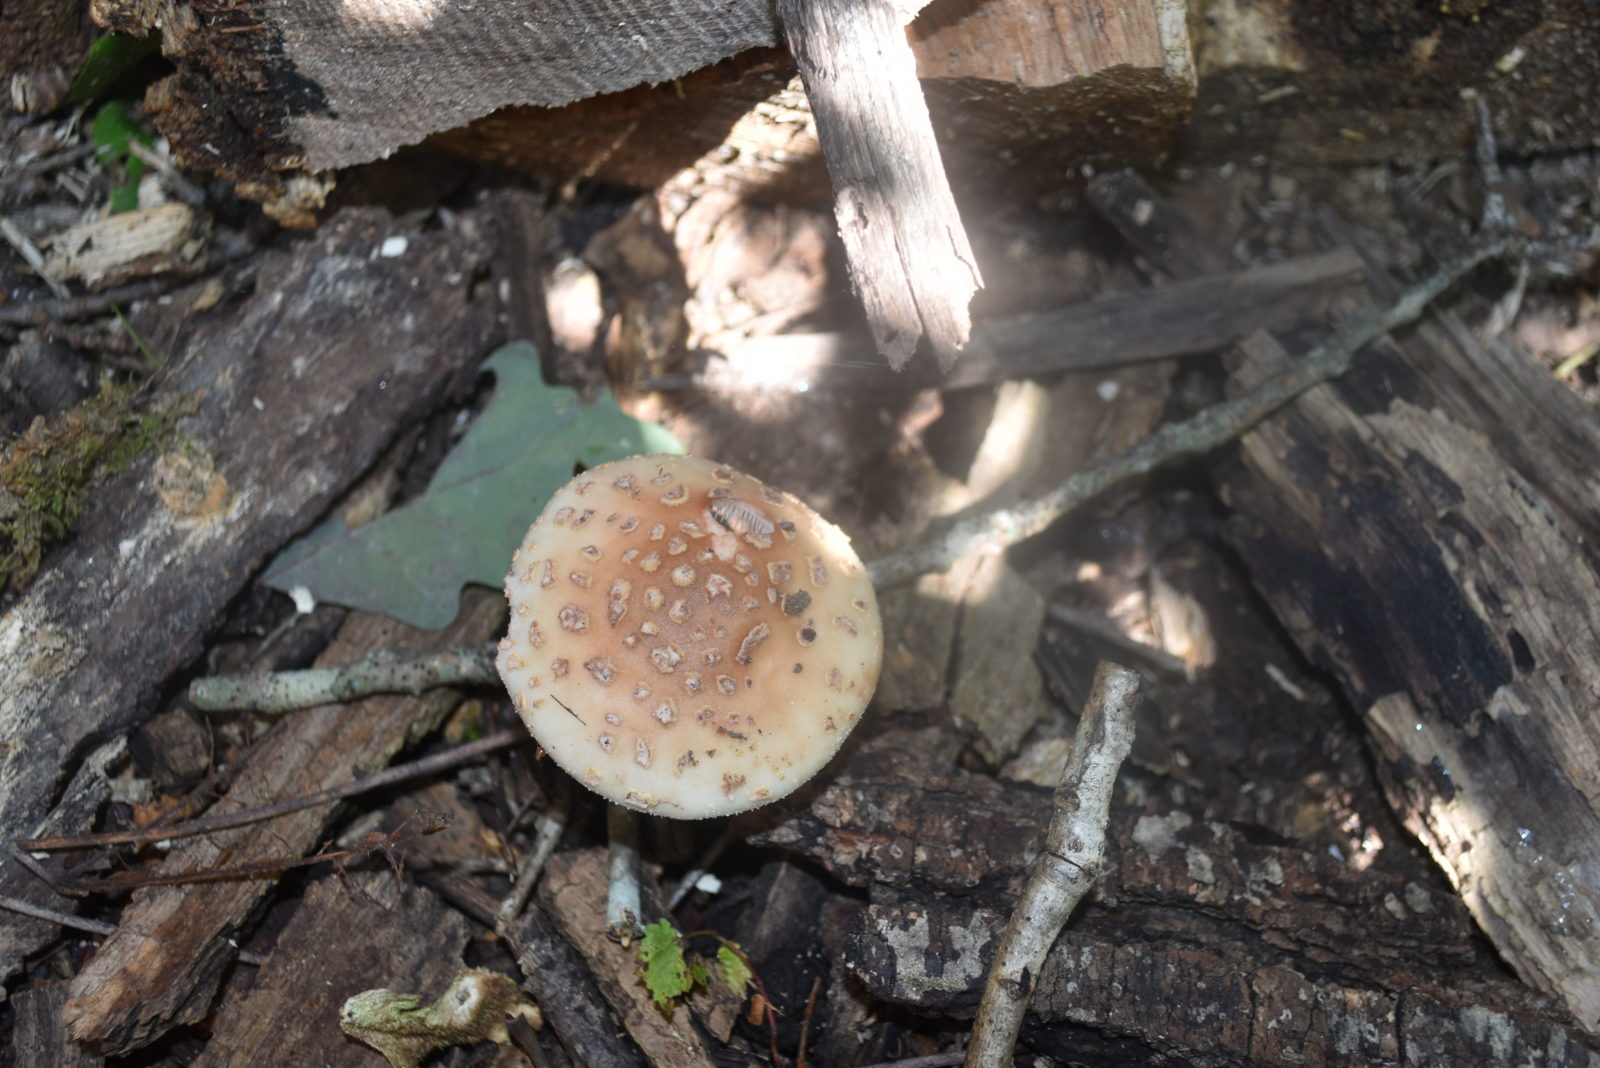 An image of a member of the amanita family of mushrooms; these have a singular round cap and are often spotted on the top. This family of mushrooms is often poisonous and hallucinogenic; do not consume